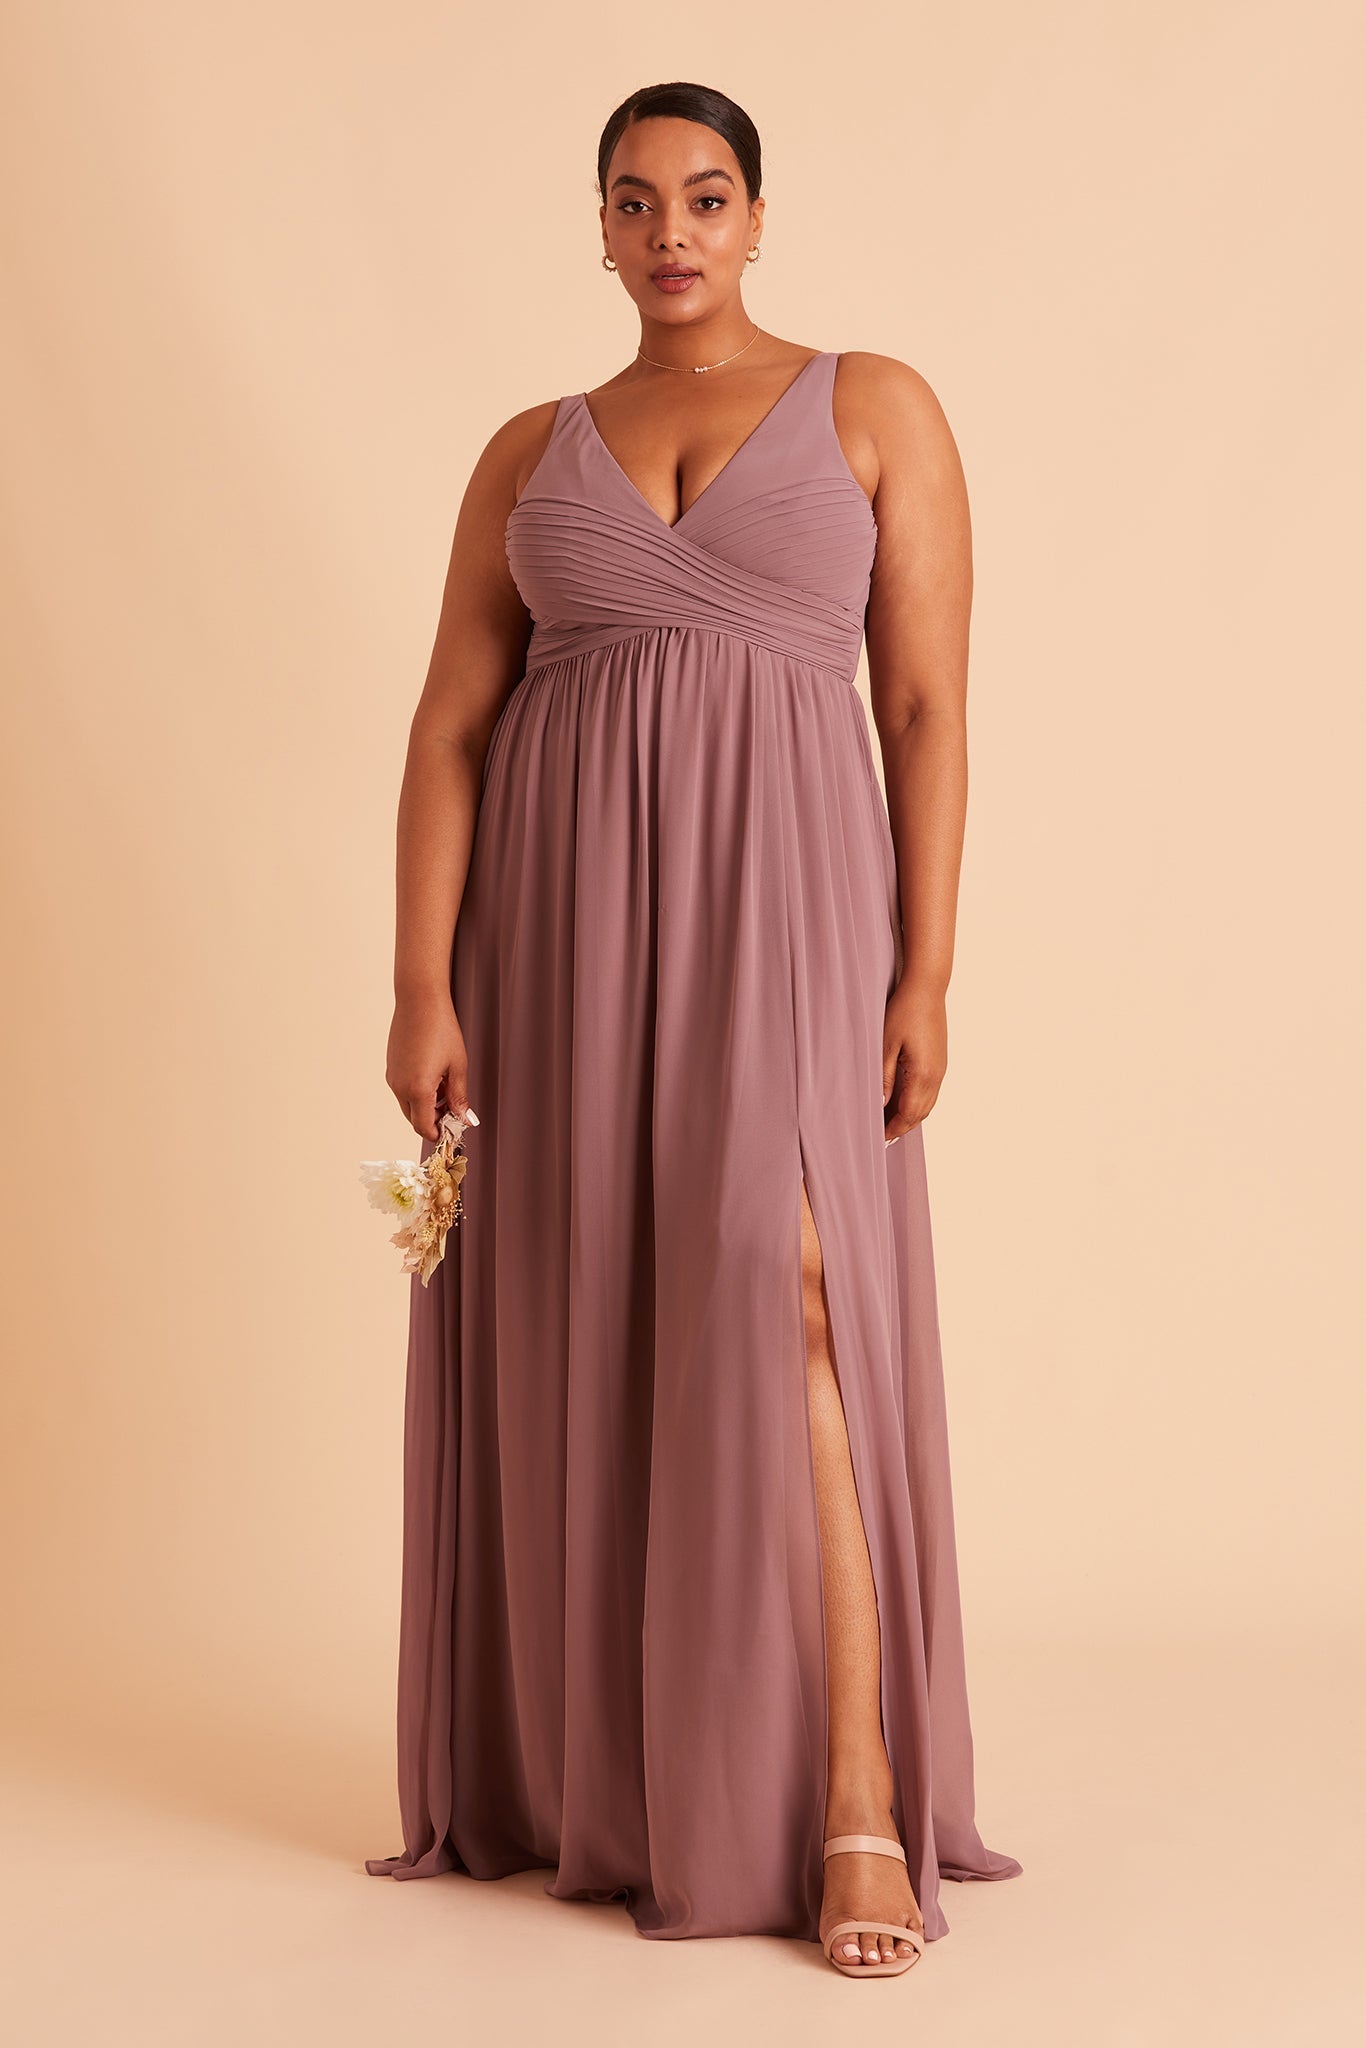 Laurie Empire plus size maternity bridesmaid dress with slit in dark mauve chiffon by Birdy Grey, front view